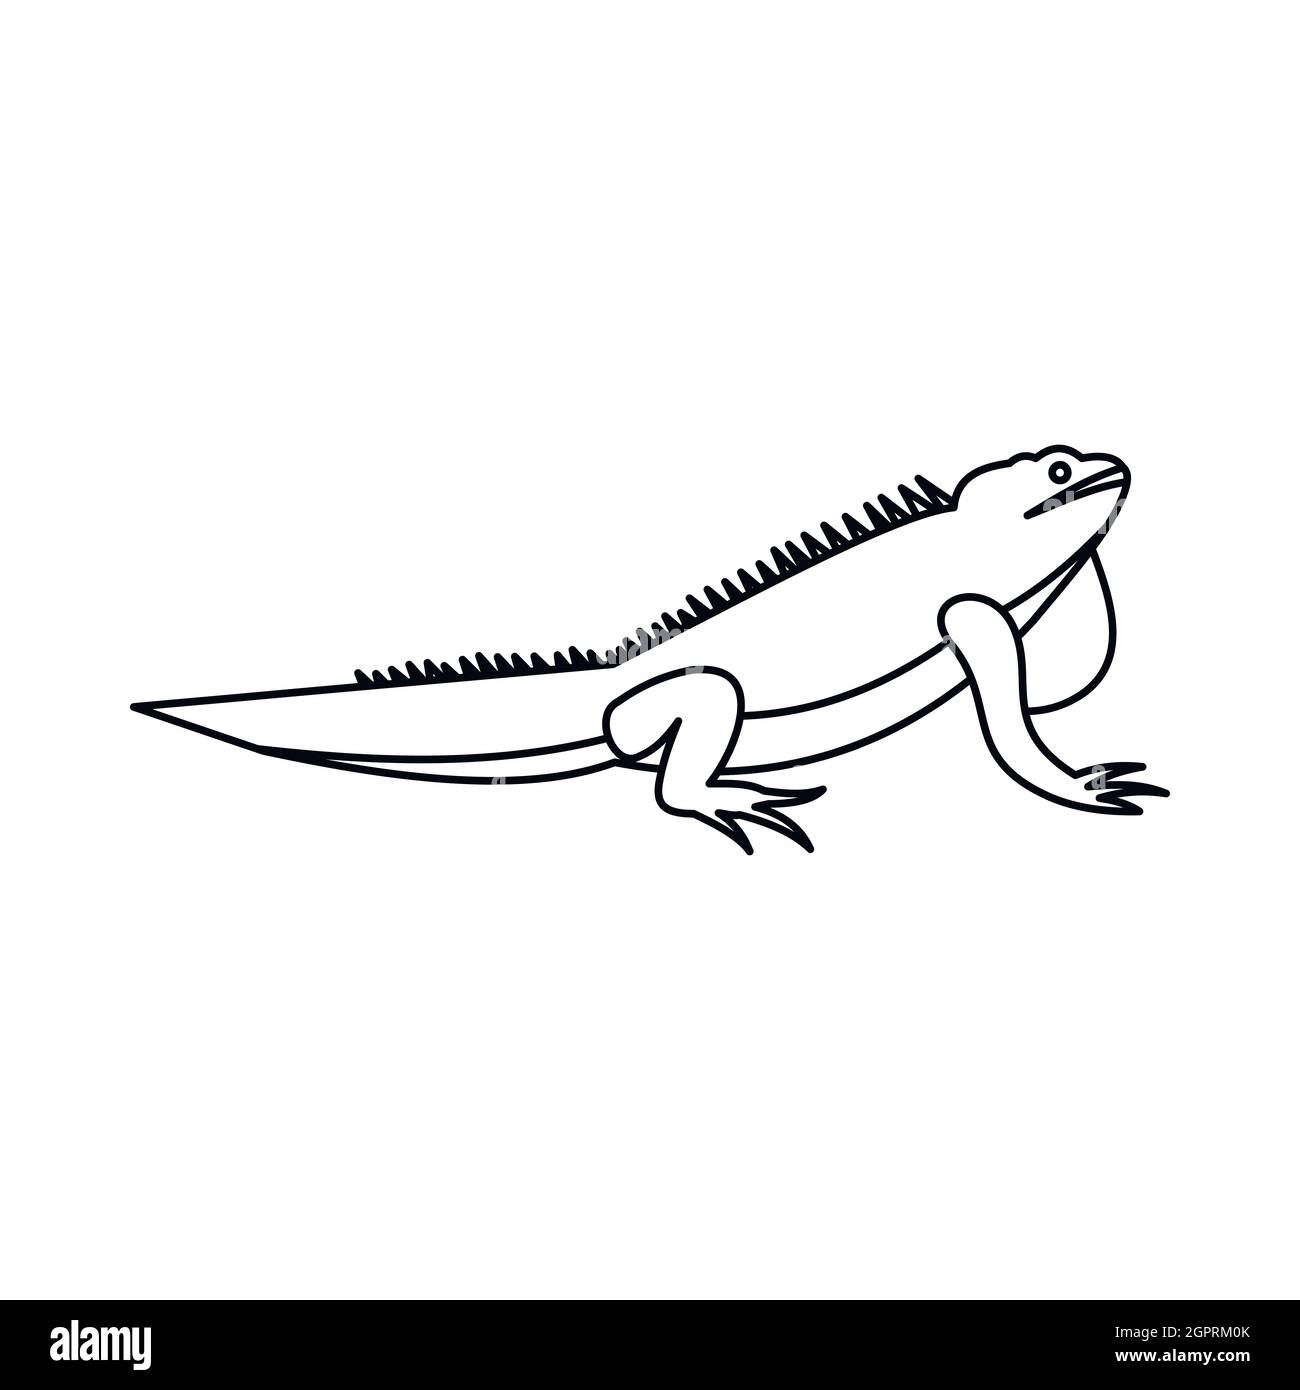 Iguana line icon Cut Out Stock Images & Pictures - Alamy